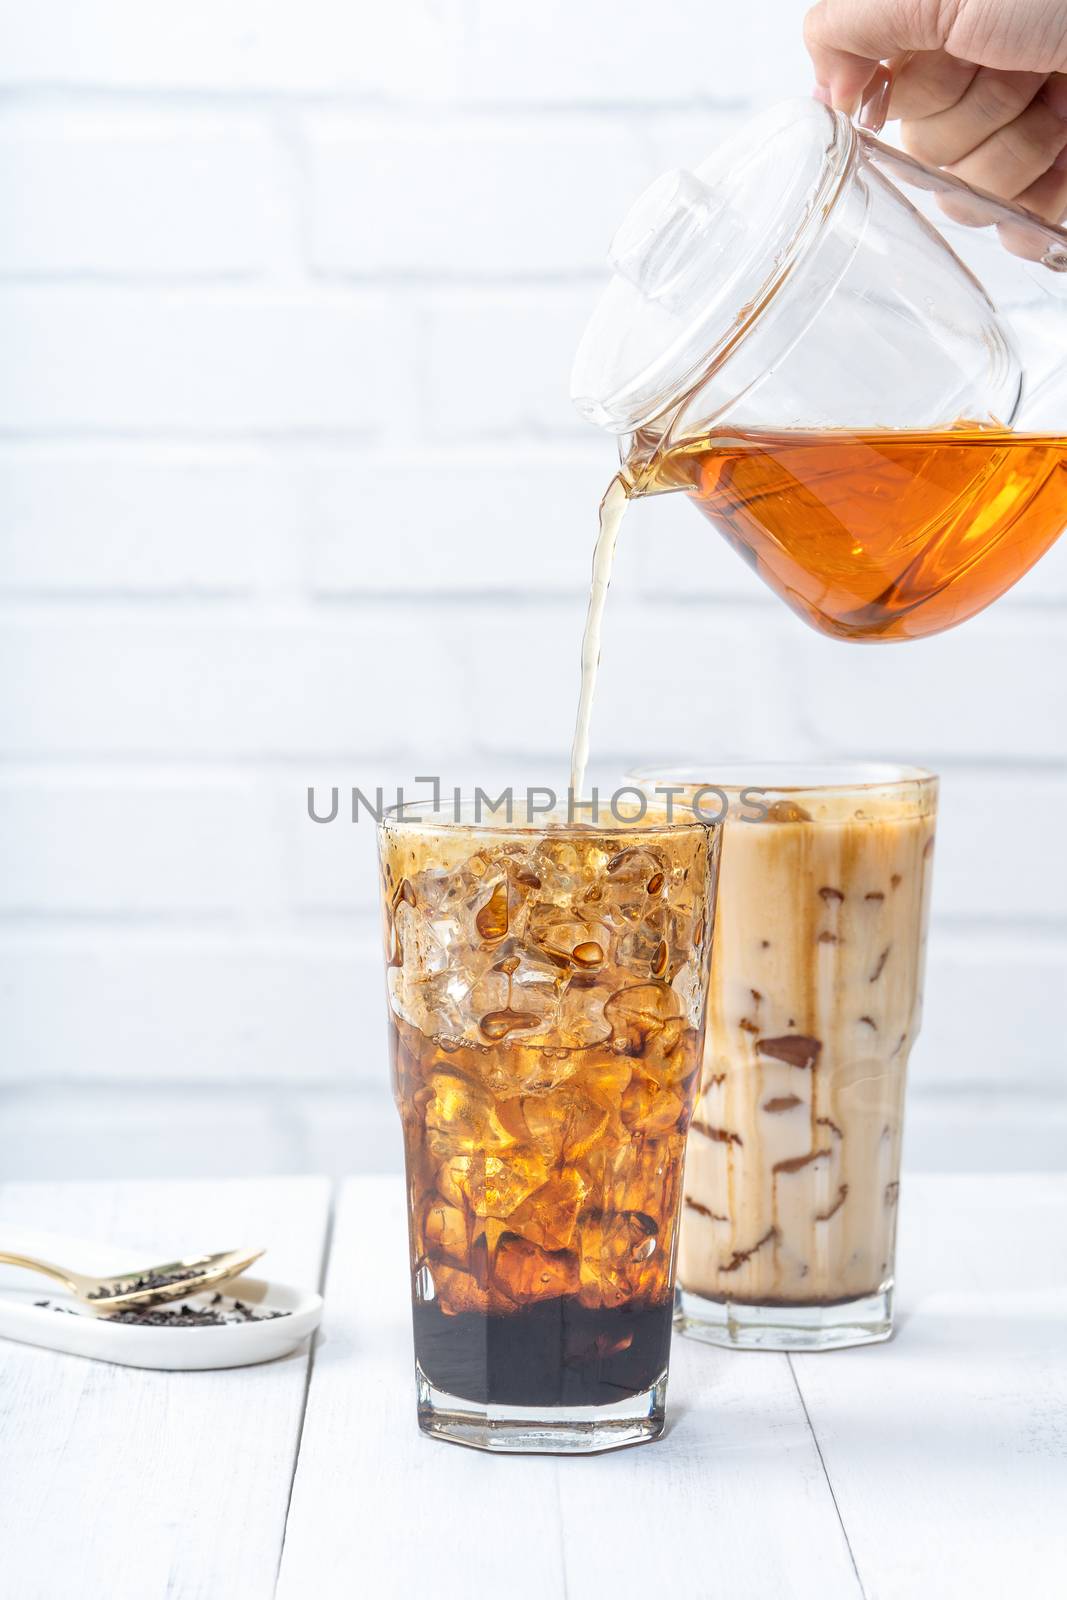 Making bubble tea, pouring blend milk tea into brown sugar pattern drinking glass cup on white wooden table background, close up, copy space